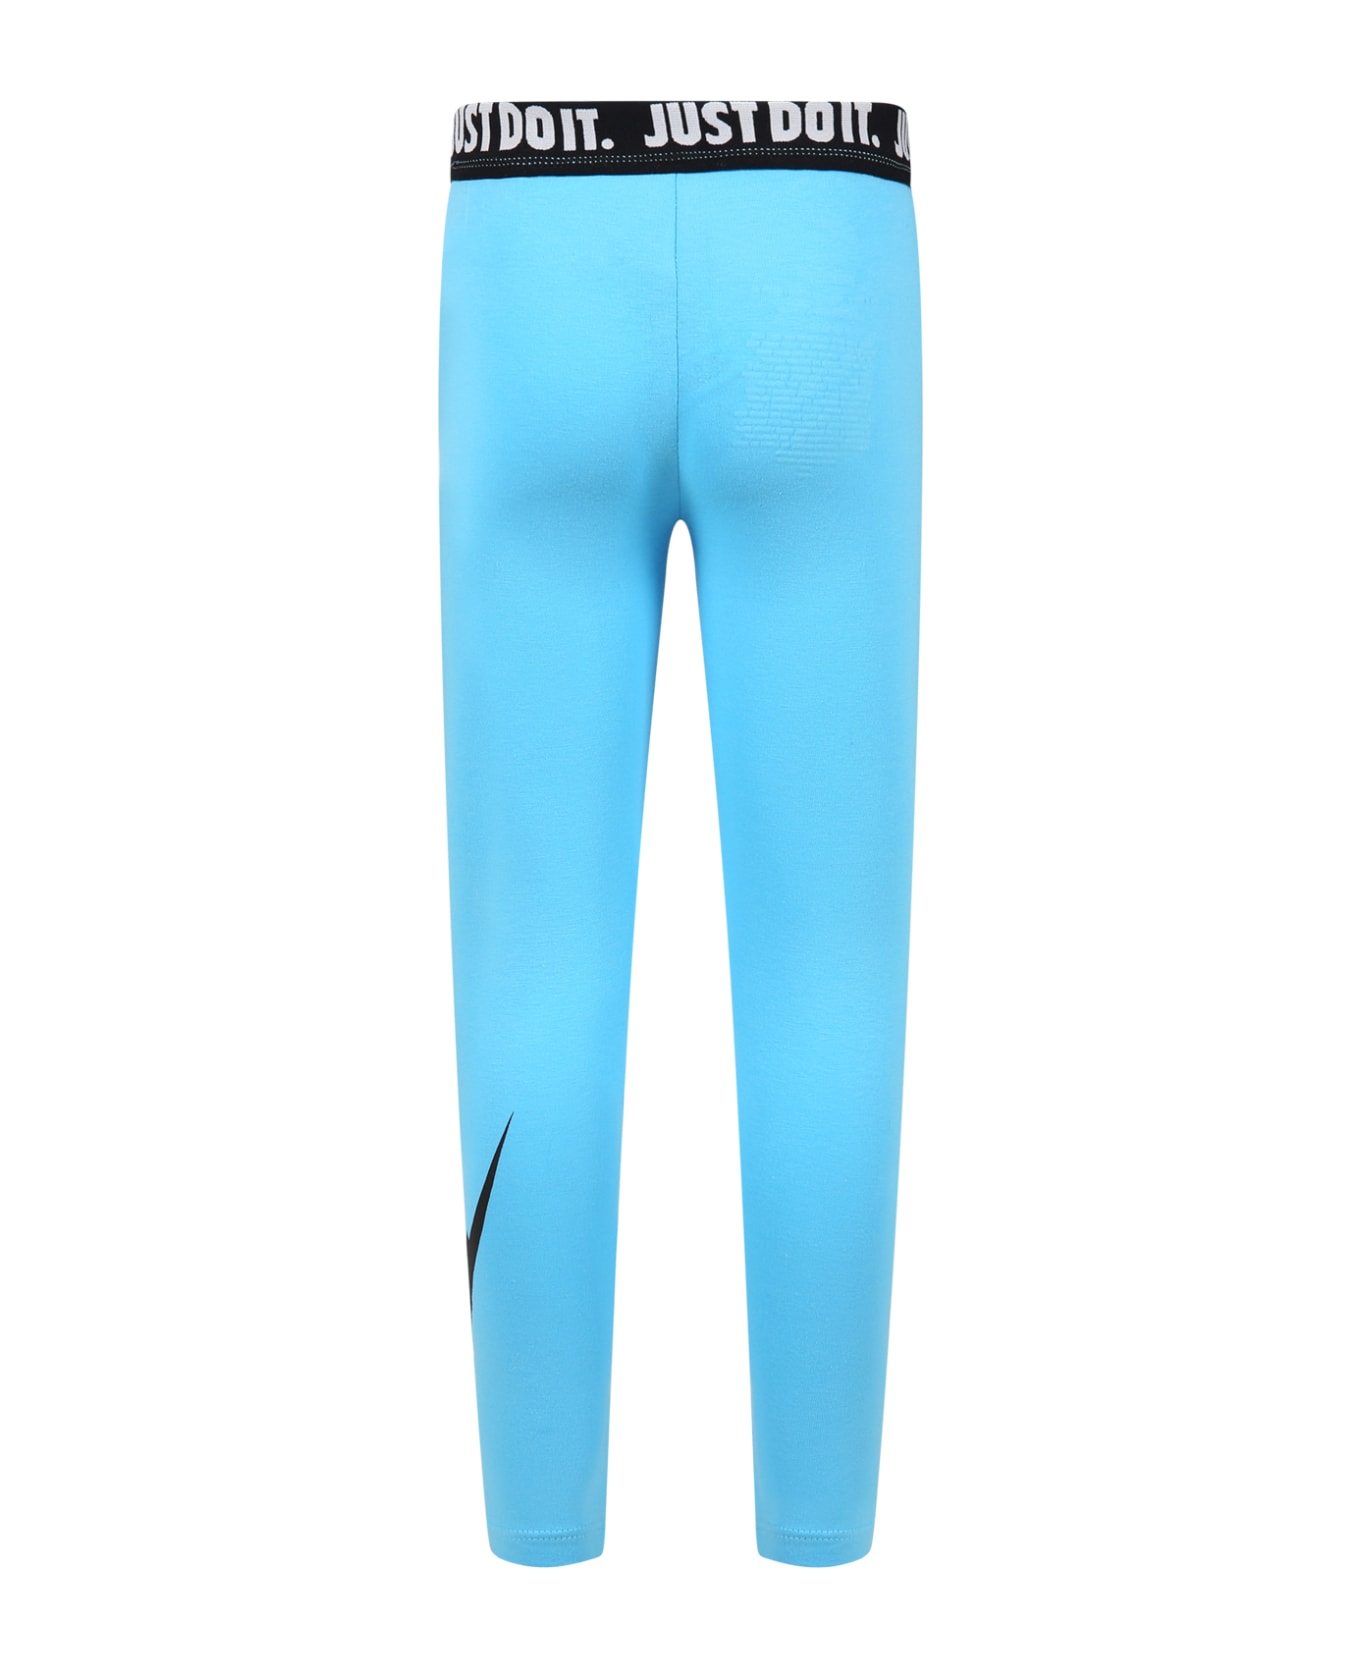 Nike Light Blue Trousers For Girl With Log And "just Do It" Writing - Light Blue